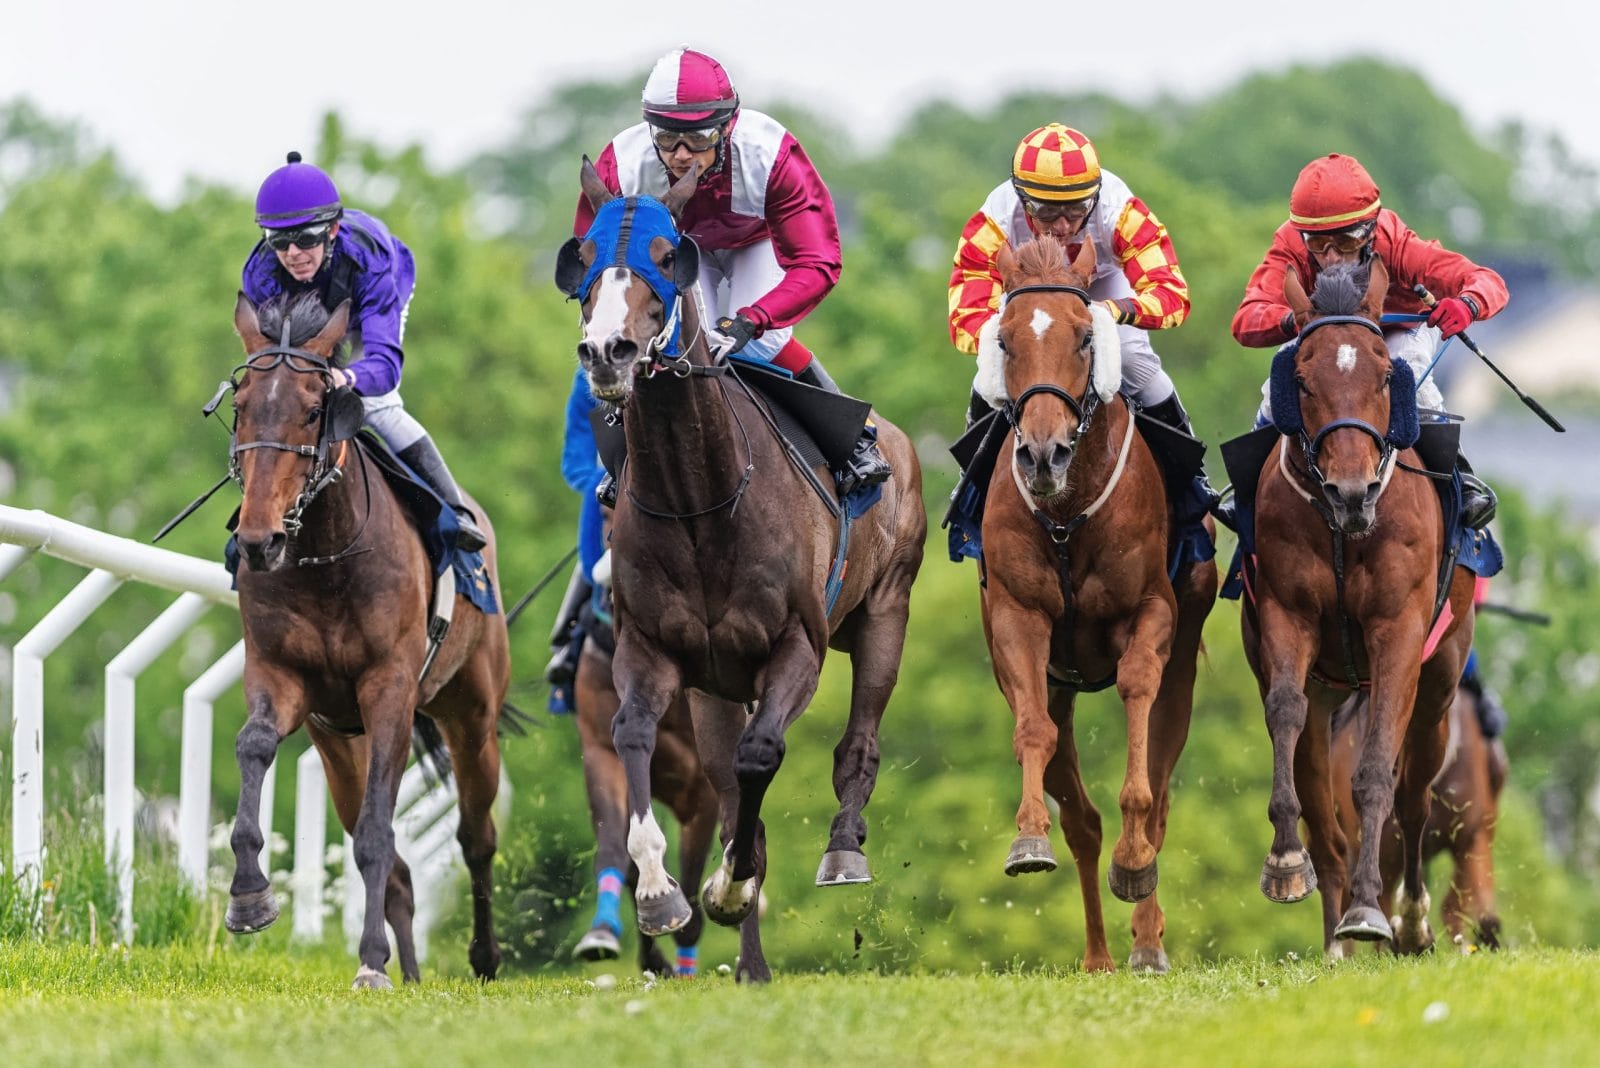 Four horses racing on a track